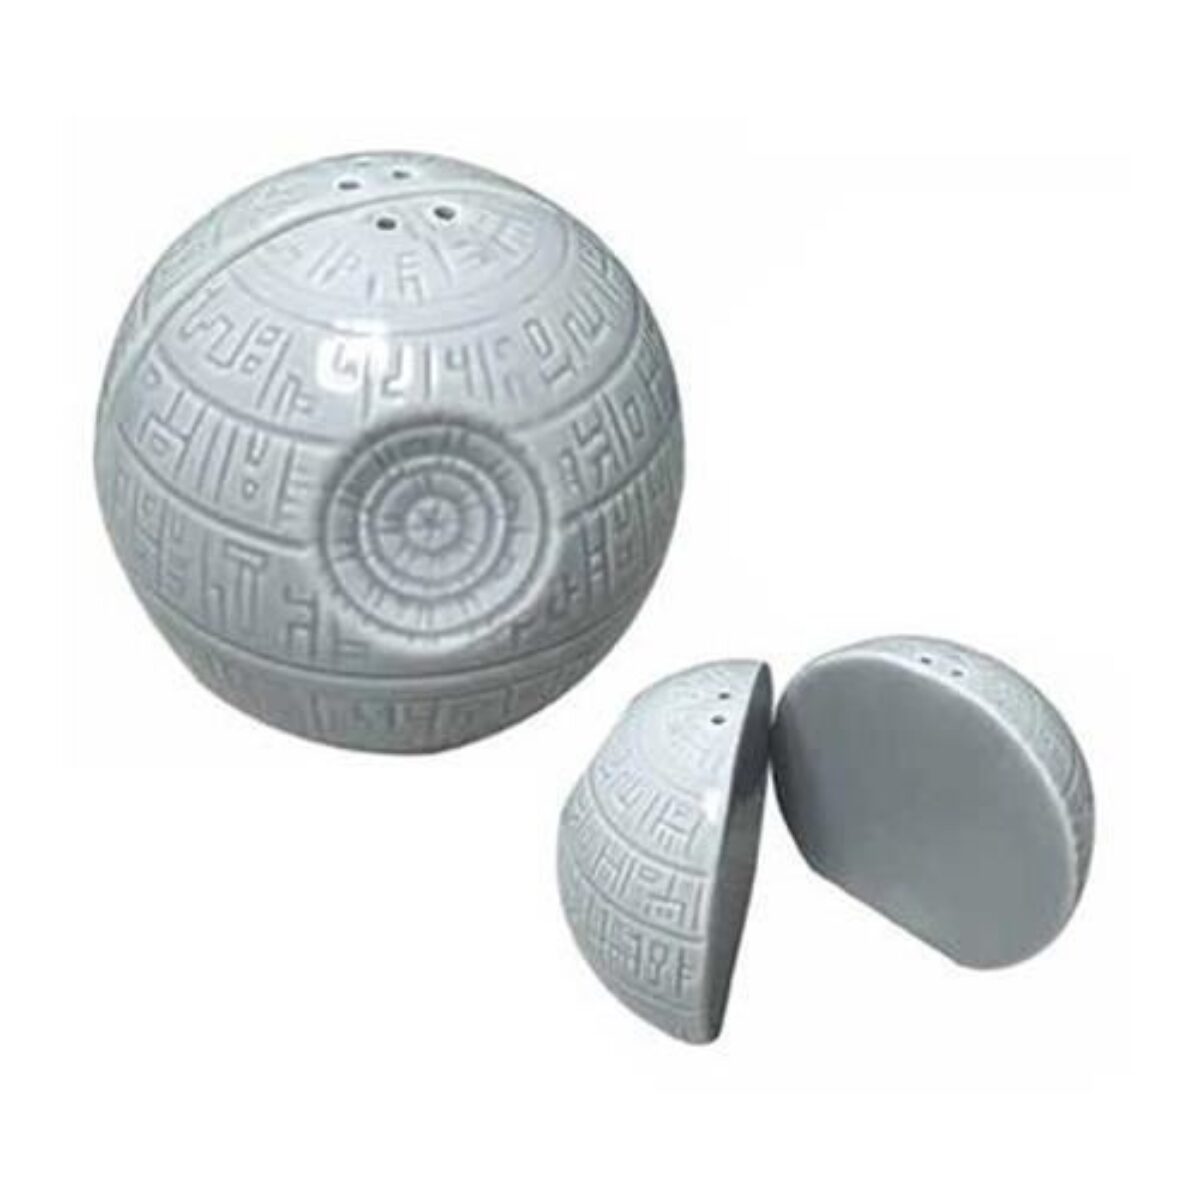 Star Wars Death Star Salt and Pepper Shakers